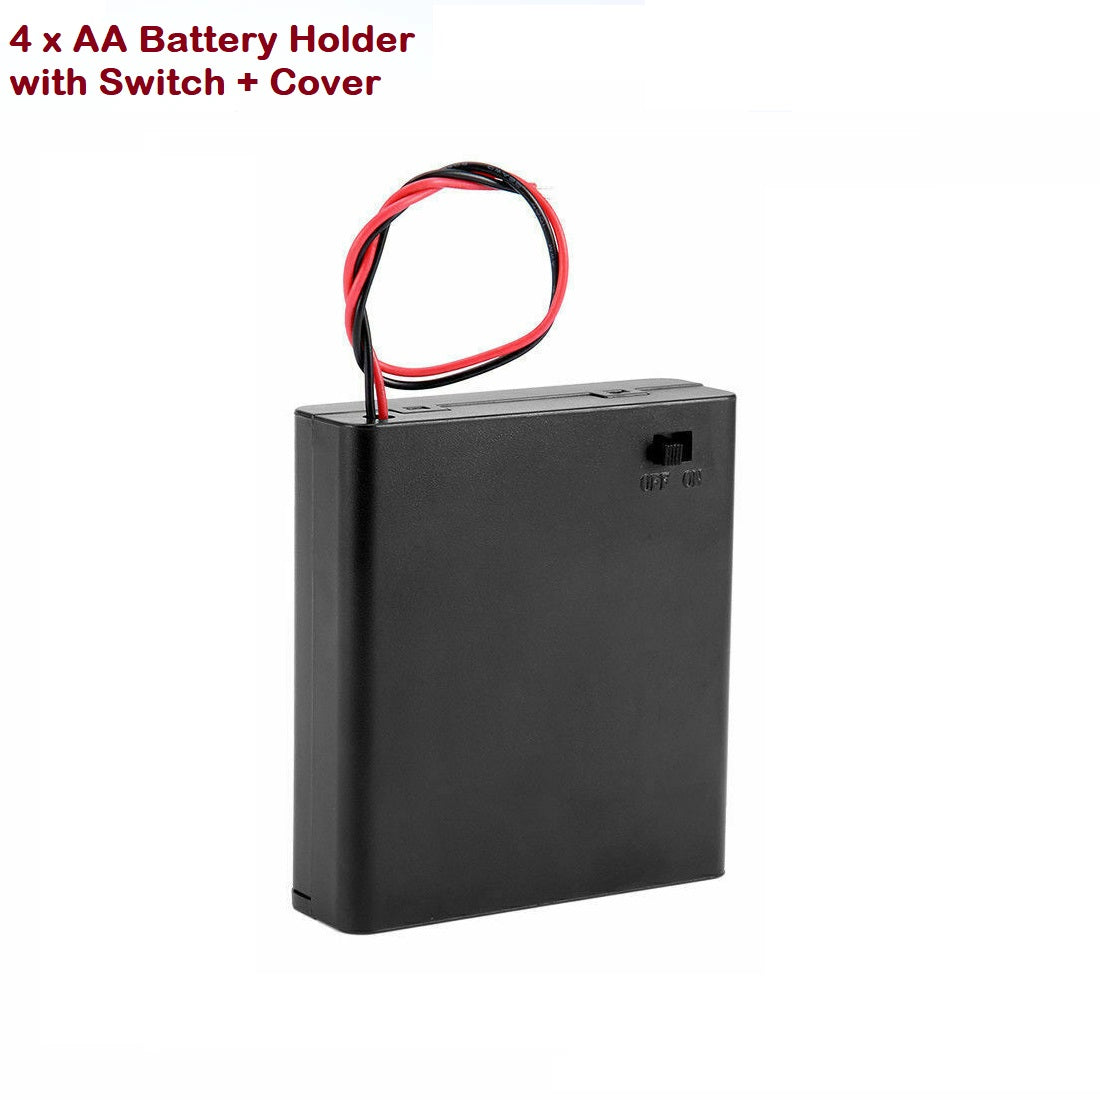 4 x AA 6V Battery Holder Storage Case Wired ON/OFF Switch w Cover